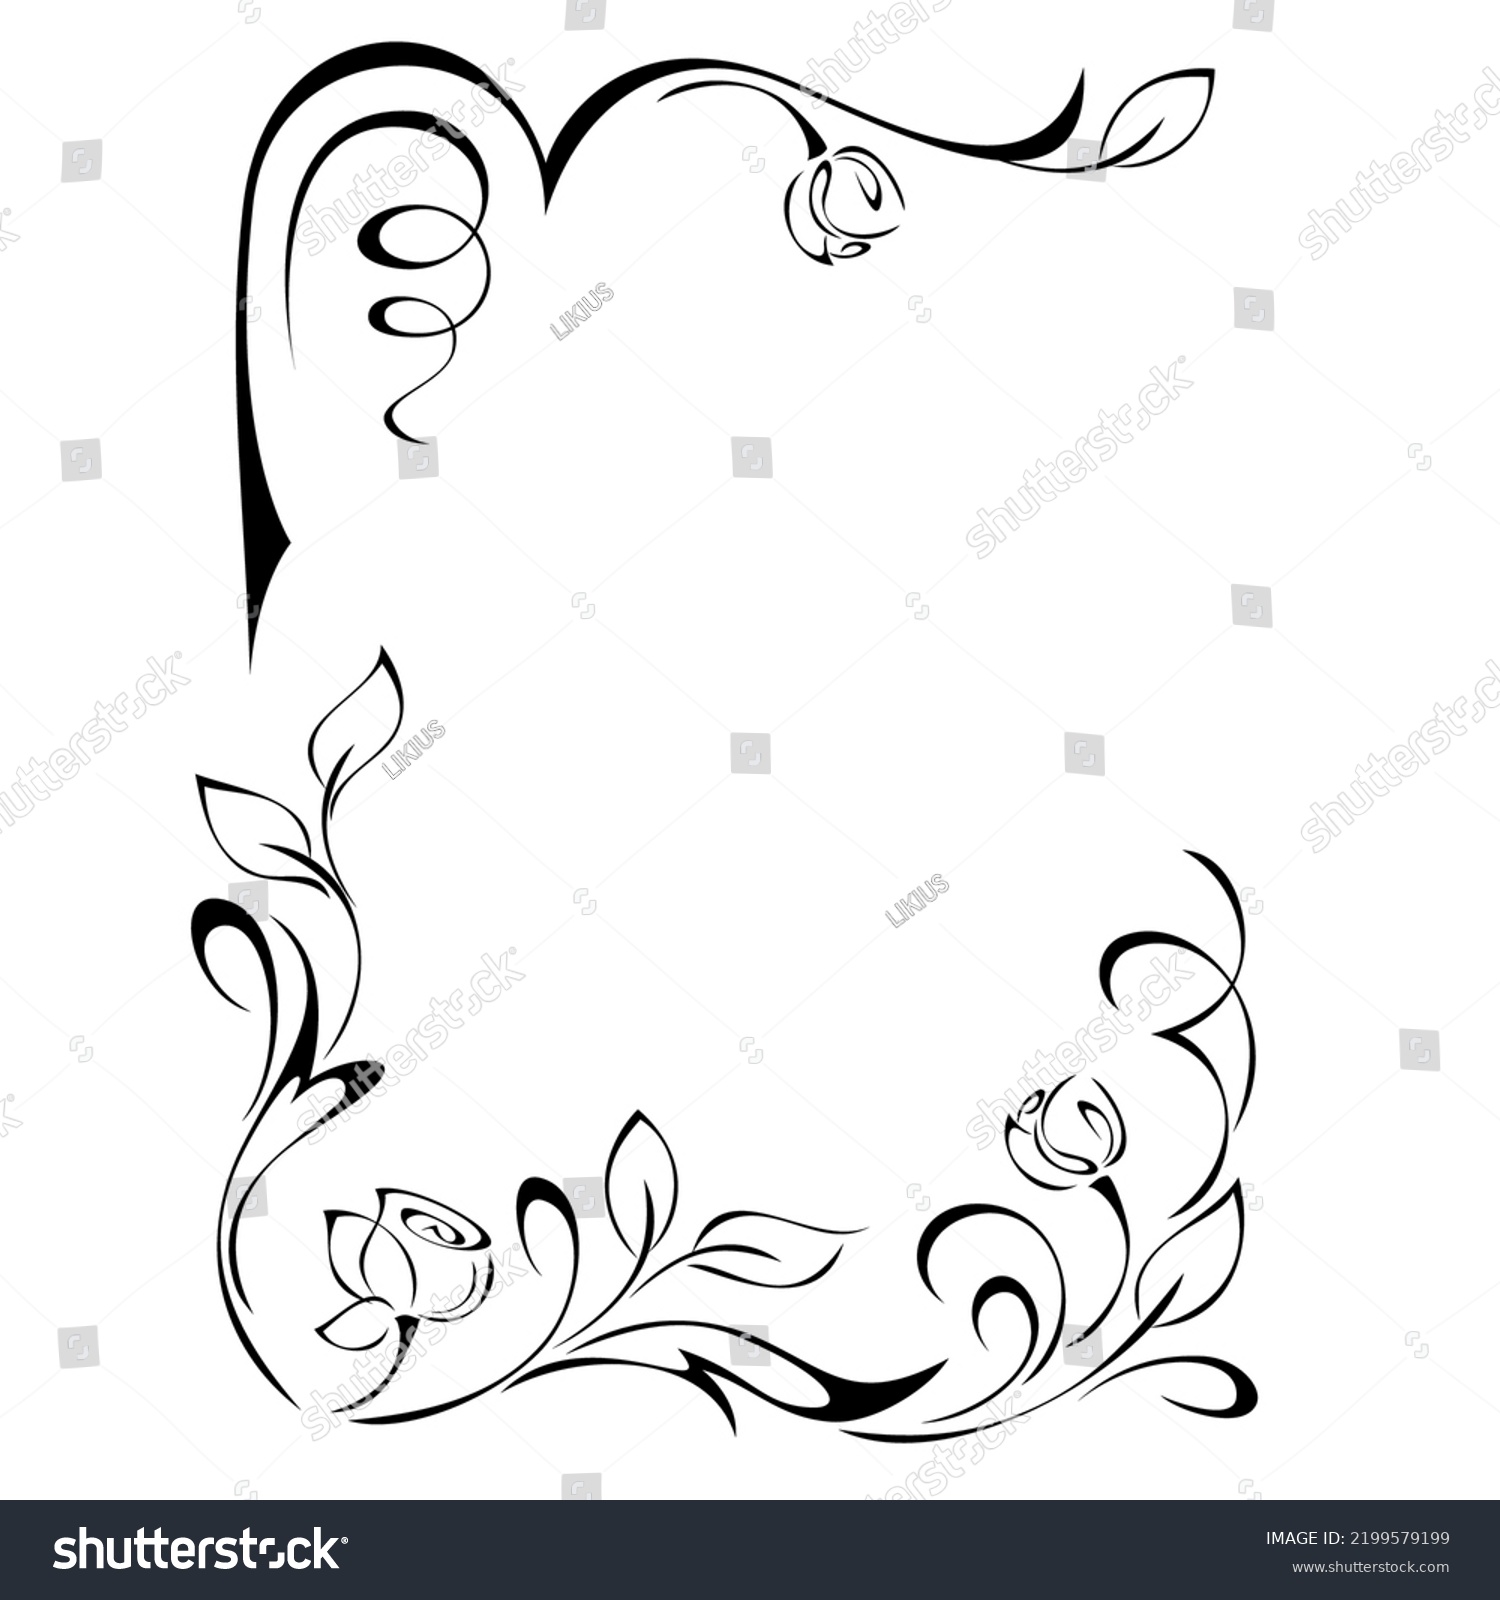 decorative rectangular frame with stylized rosebuds with leaves and vignettes in black lines on a white background #2199579199